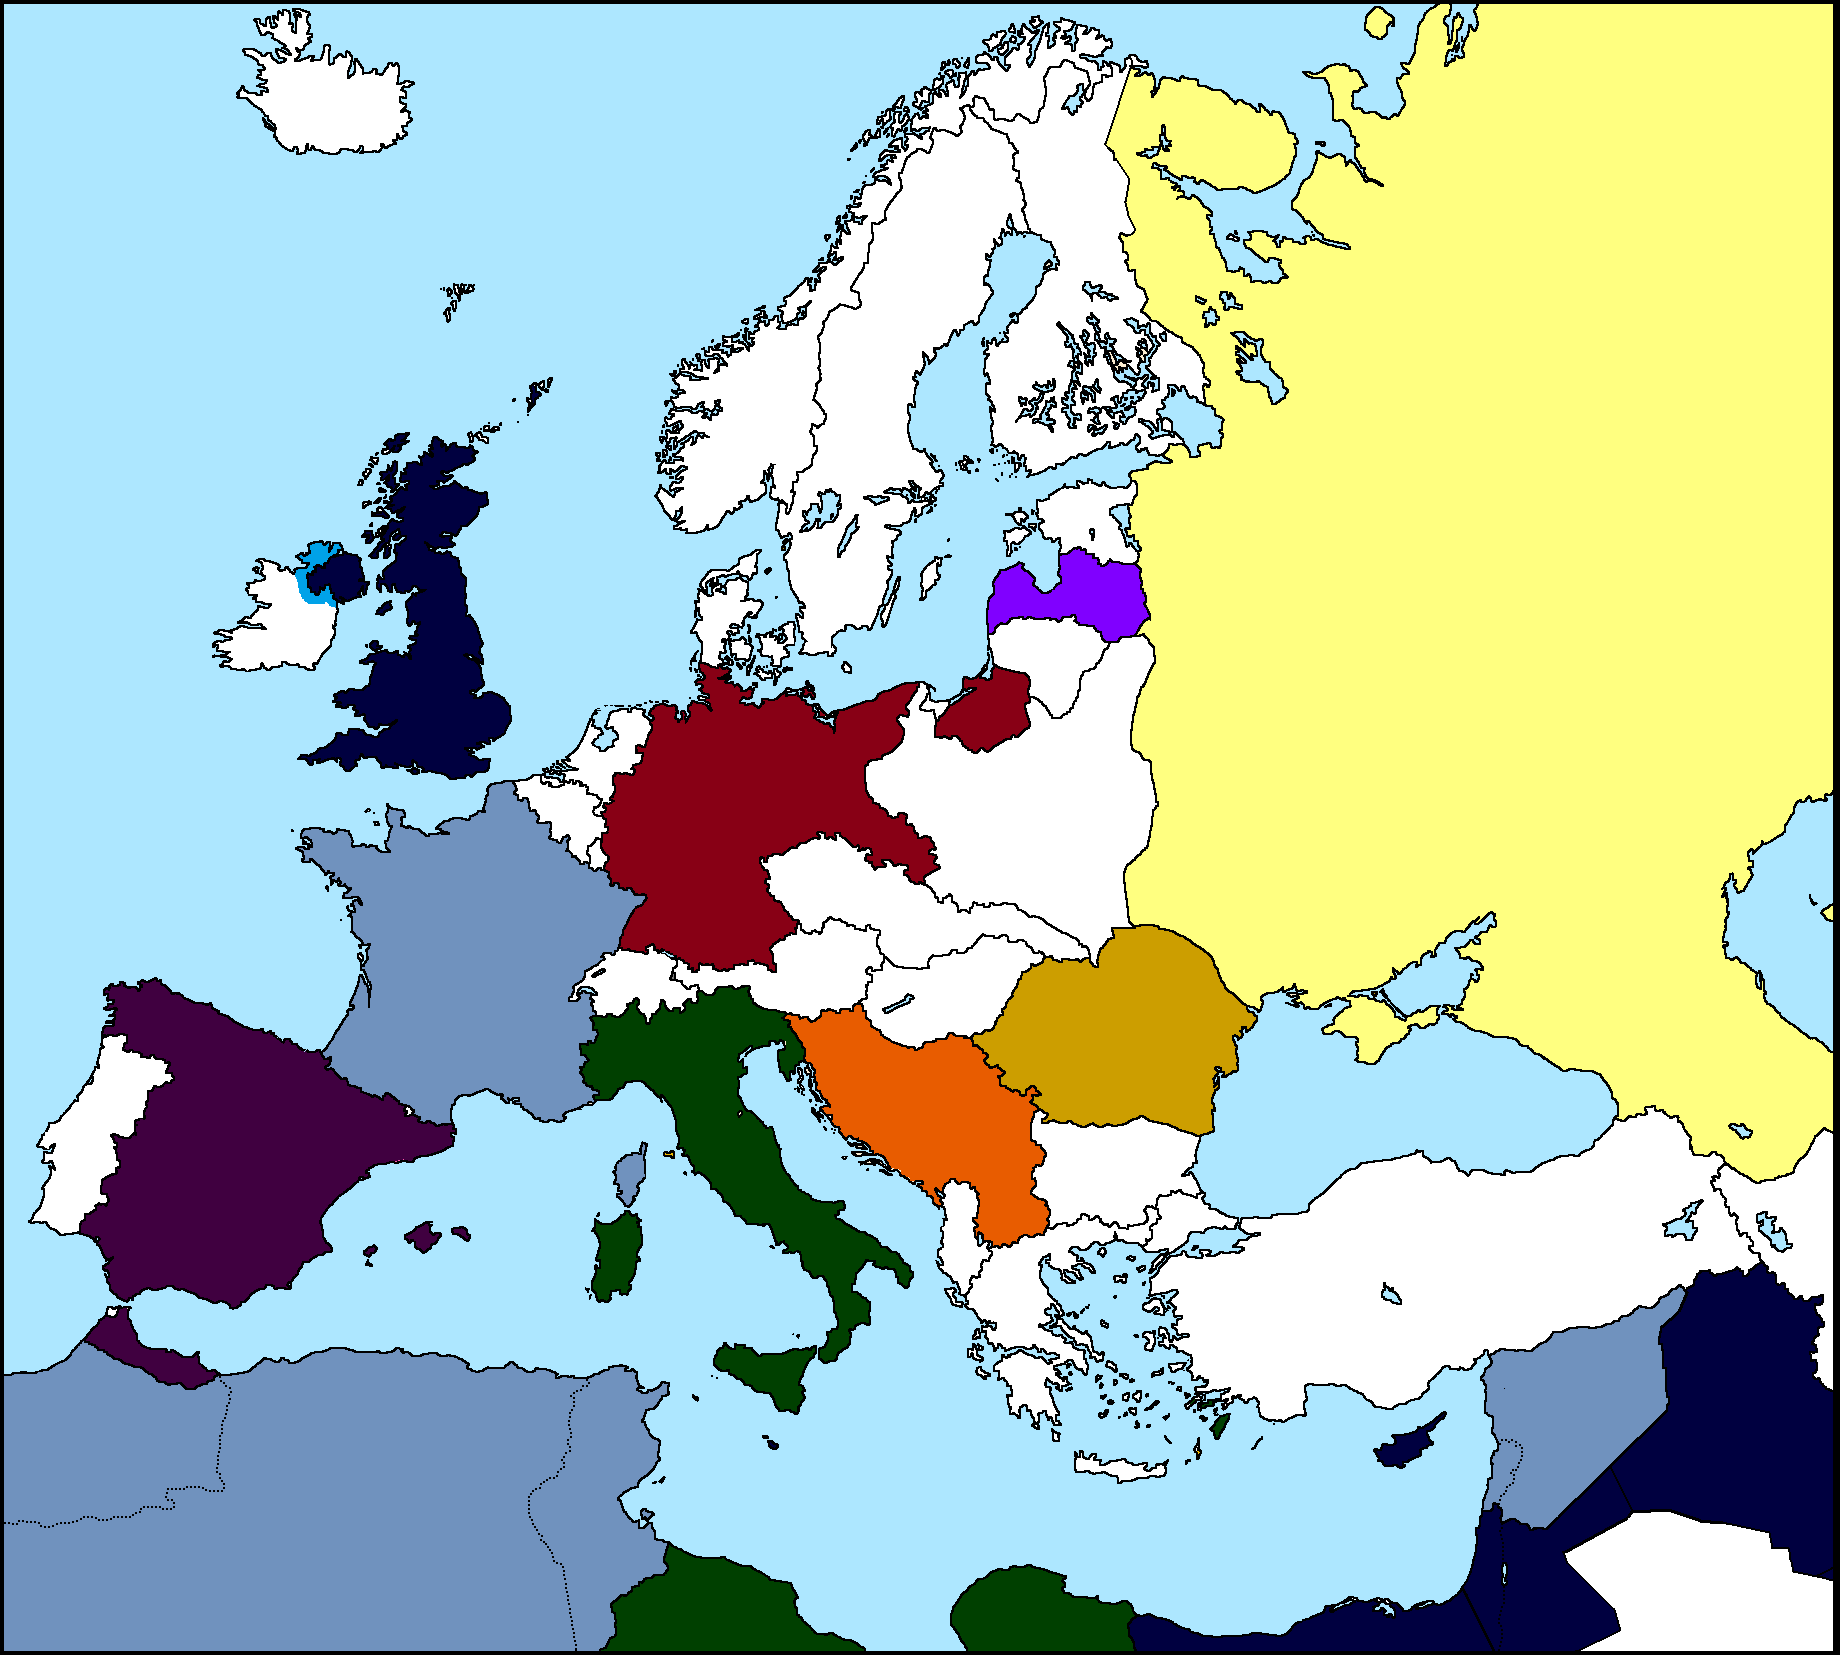 Empires of Europe: 1930 | TheFutureOfEuropes Wiki | FANDOM powered by Wikia